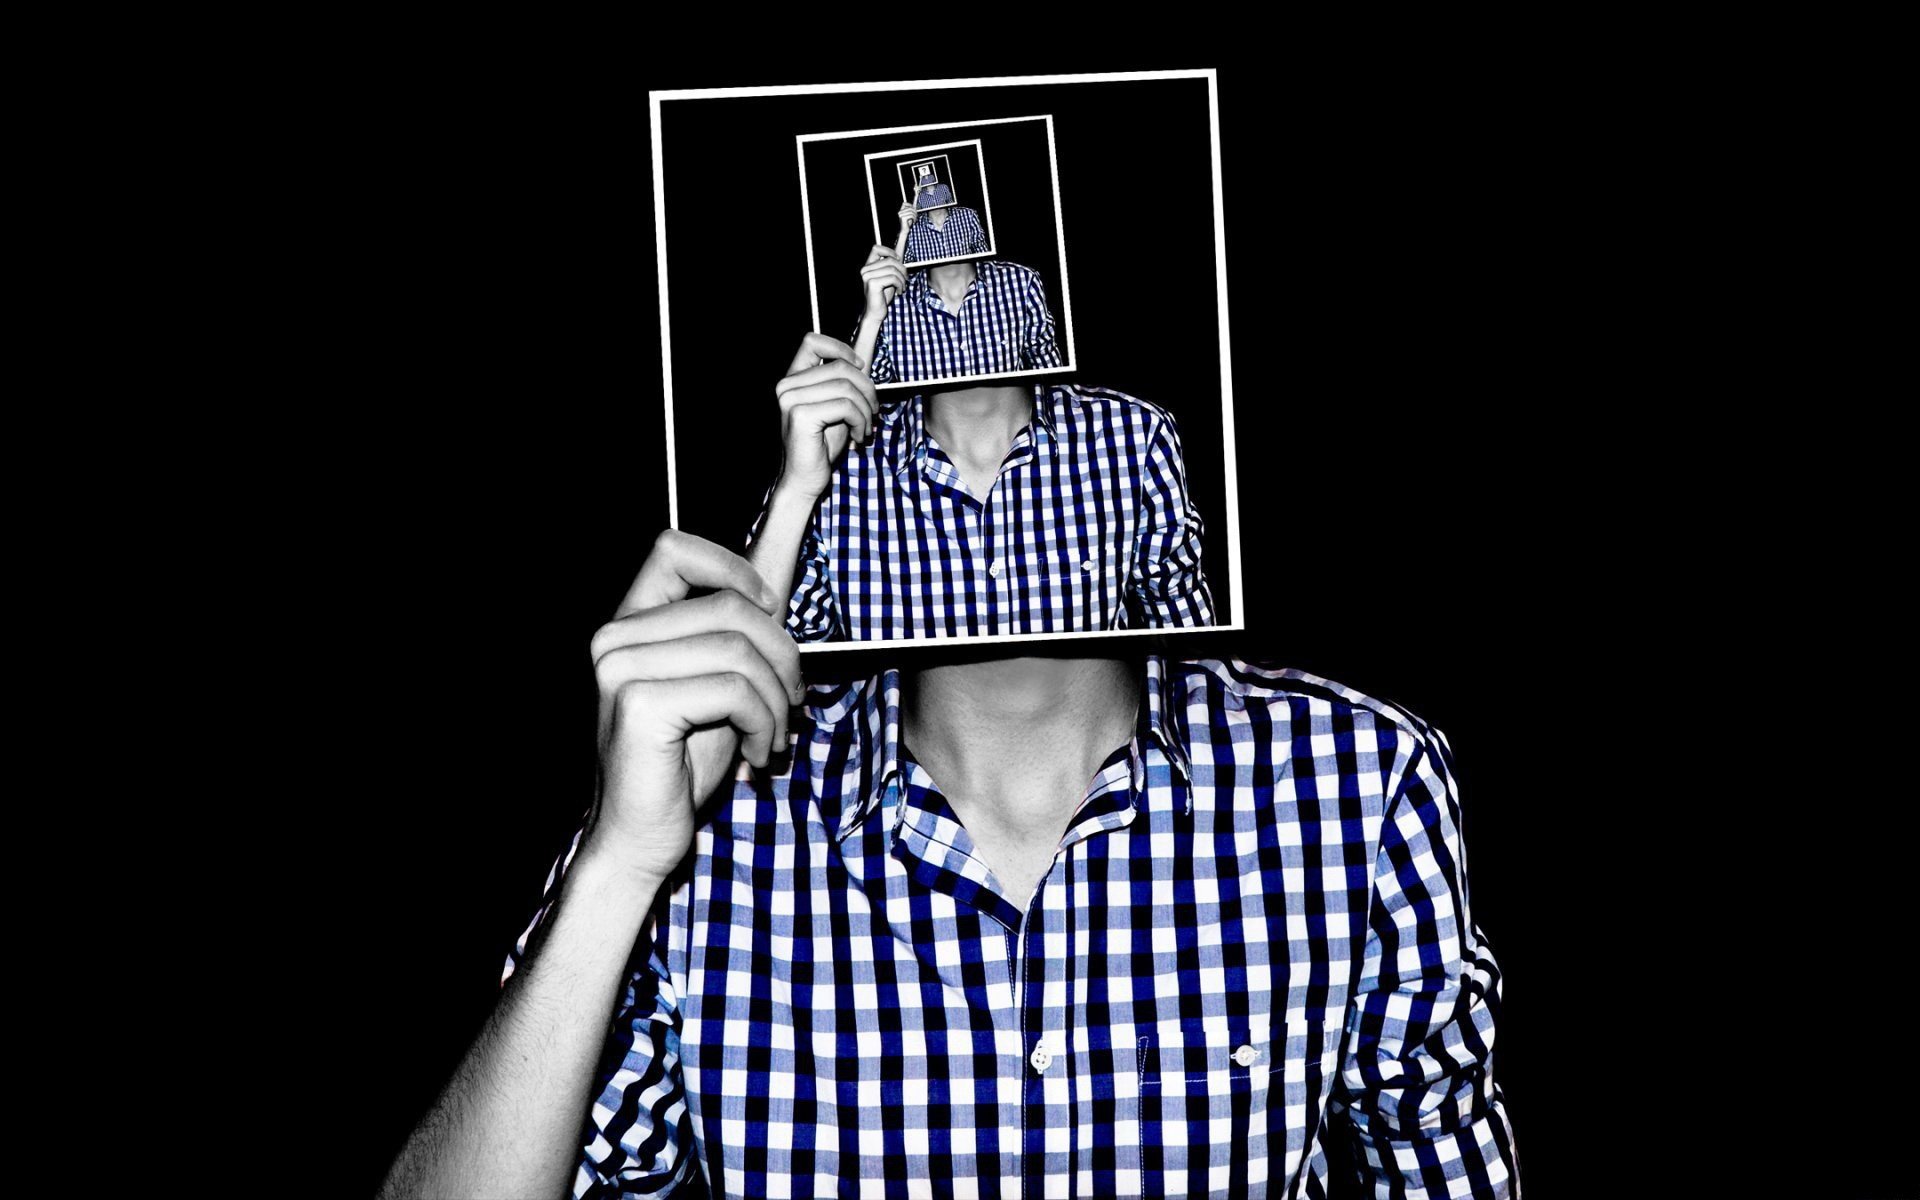 creativity, Photo manipulation, Men, Checkered, Shirt, Picture frames, Multiple display, Optical illusion, Black background, Selective coloring, Recursion Wallpaper